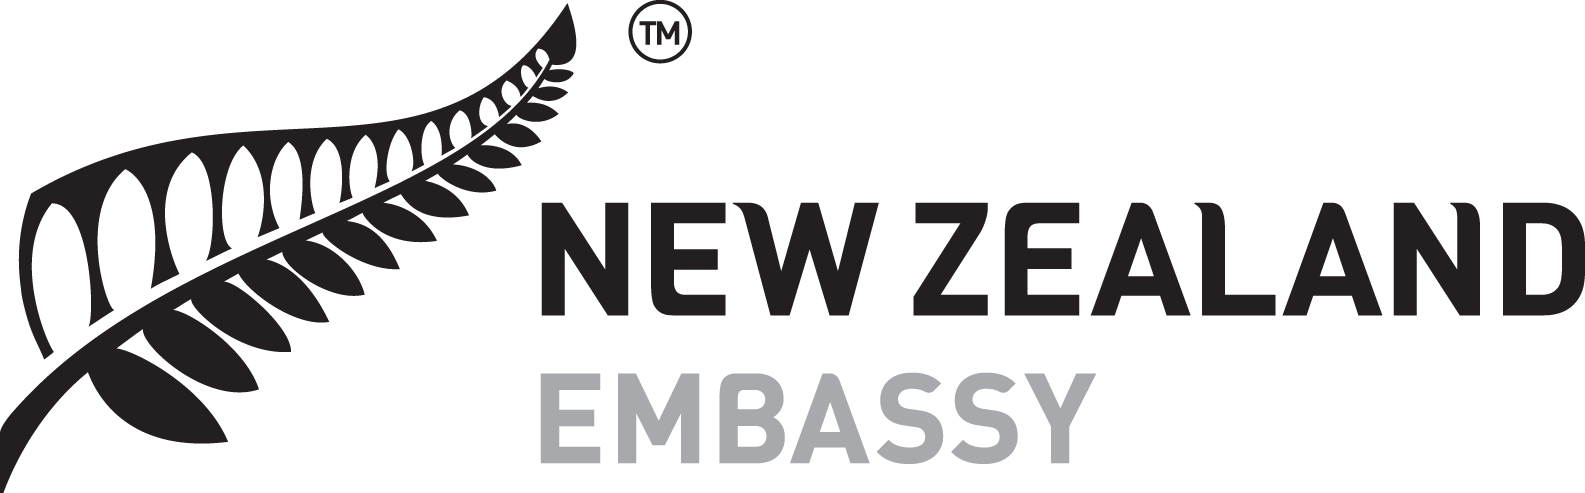 Gray and Black Logo - Logos | New Zealand Ministry of Foreign Affairs and Trade